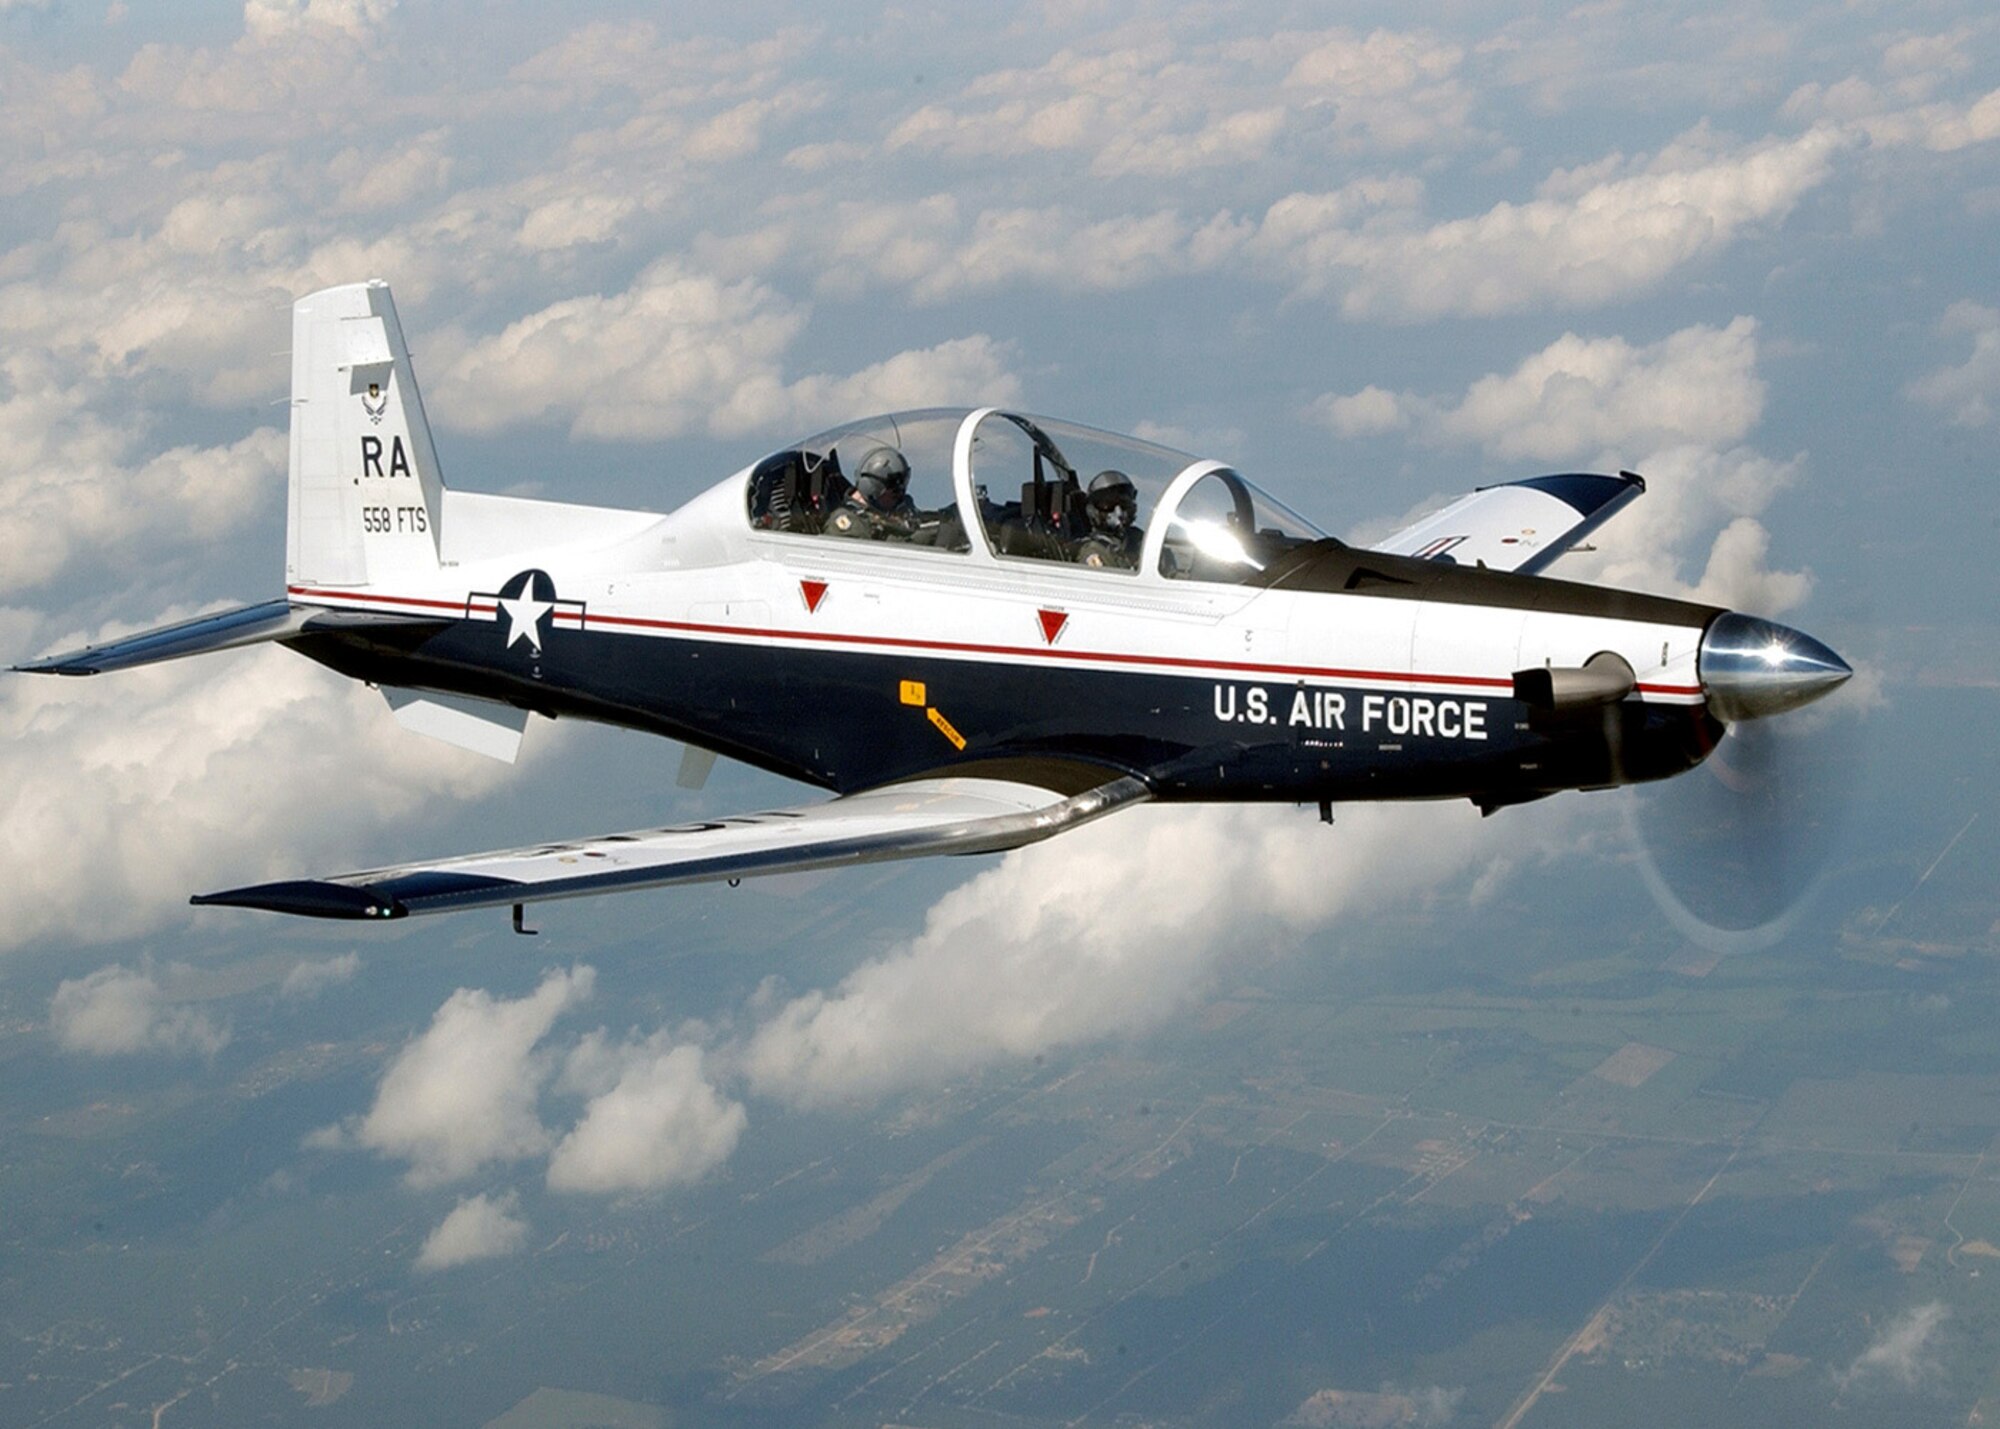 The T-6A Texan II is a single-engine, two-seat primary trainer designed to train Joint Primary Pilot Training, or JPPT, students in basic flying skills common to U.S. Air Force and Navy pilots. (U.S. Air Force photo / Master Sgt. David Richards)